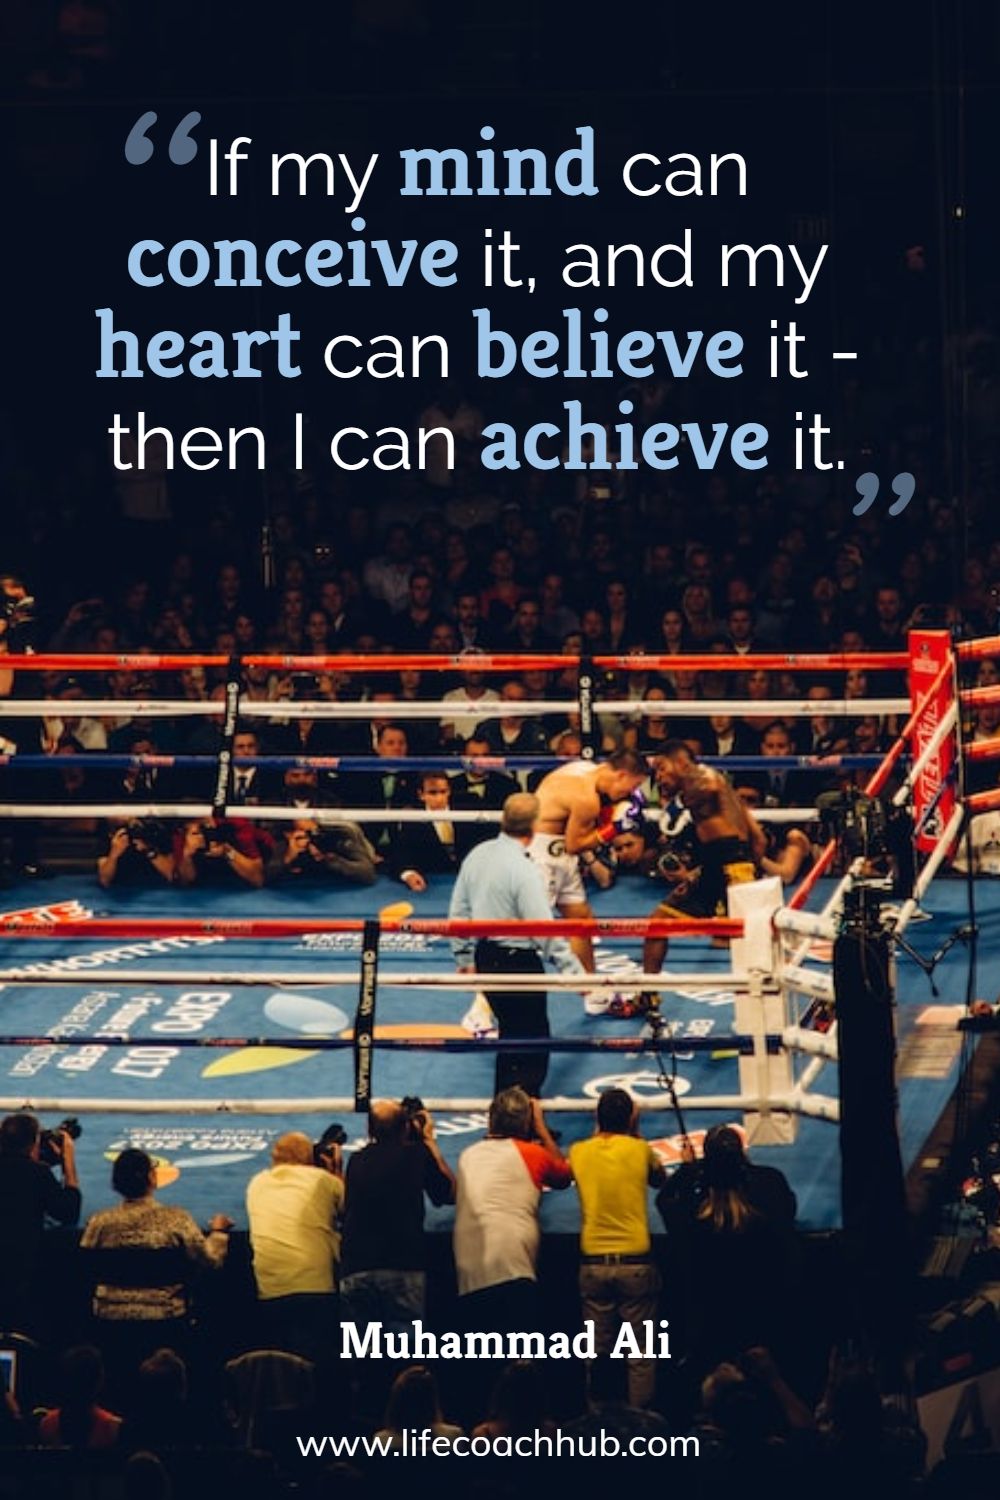 If my mind can conceive it, and my heart can believe it - then I can achieve it. Muhammad Ali Coaching Quote